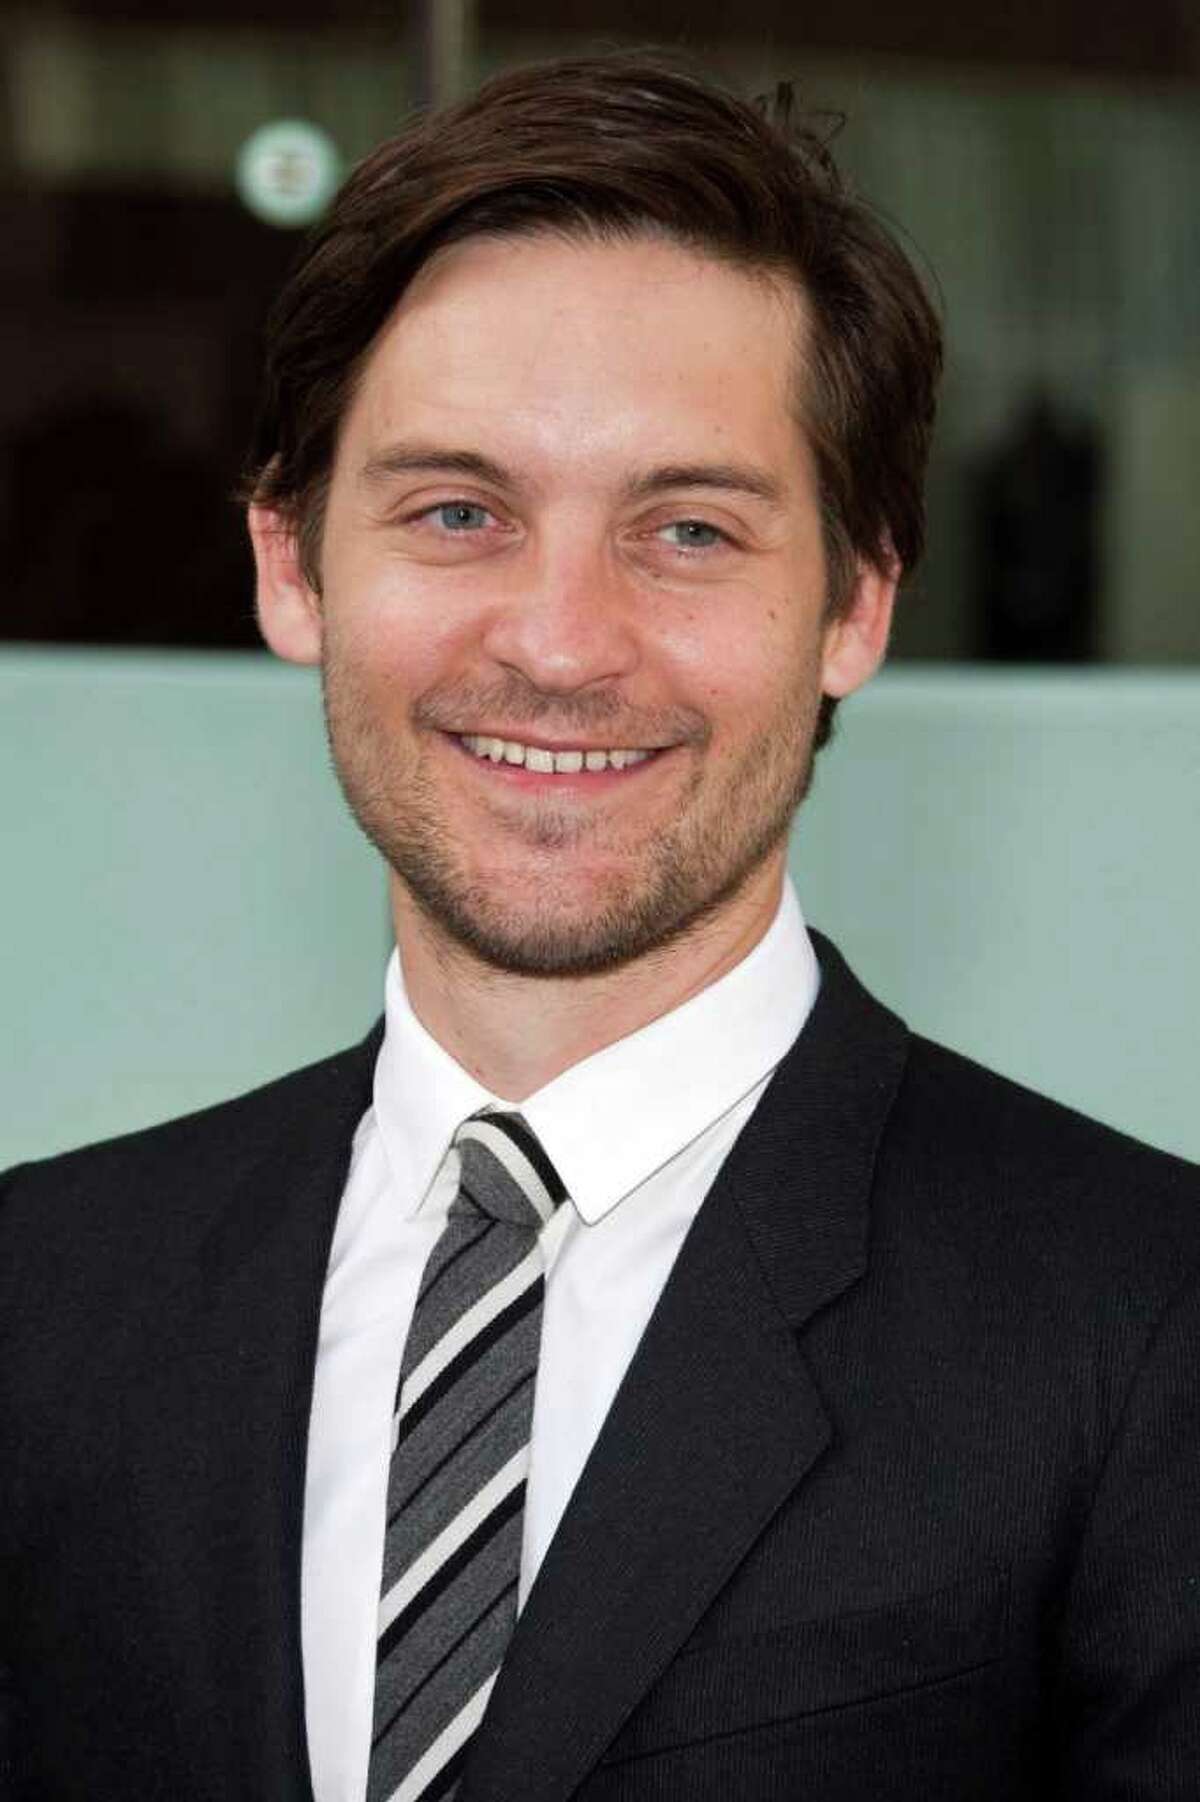 FILE - In this May 24, 2010 file photo, actor Tobey Maguire arrives to the Film Society of Lincoln Center's 37th Chaplin Award Gala honoring Michael Douglas in New York. Maguire has agreed to pay $80,000 to settle a lawsuit seeking repayment of more than $300,000 he won from a convicted con man during high stakes private poker games. (AP Photo/Charles Sykes, file)